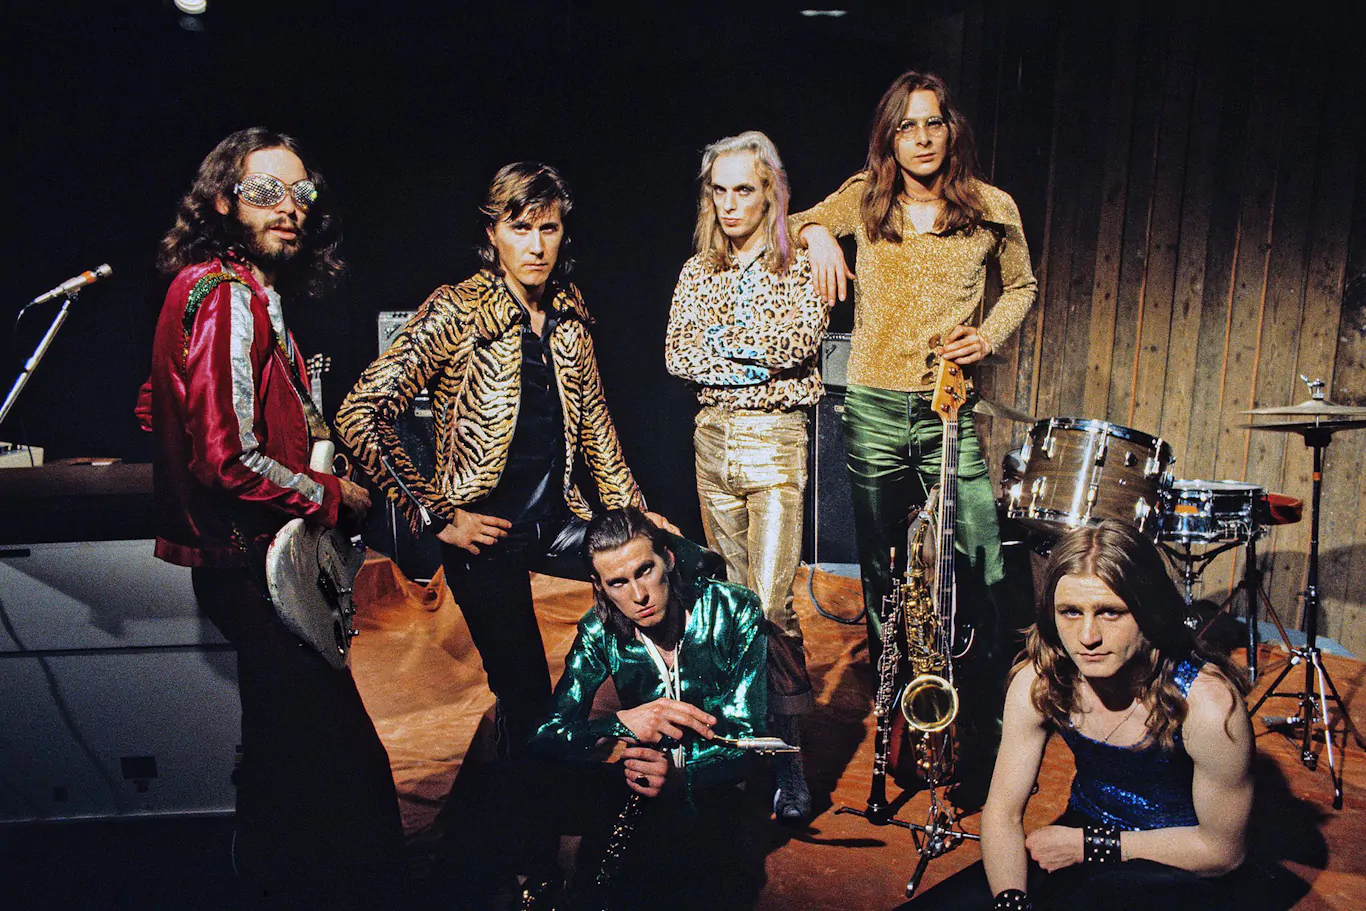 ROXY MUSIC’s ‘The Best Of Roxy Music’ to be released on vinyl for the first time in September